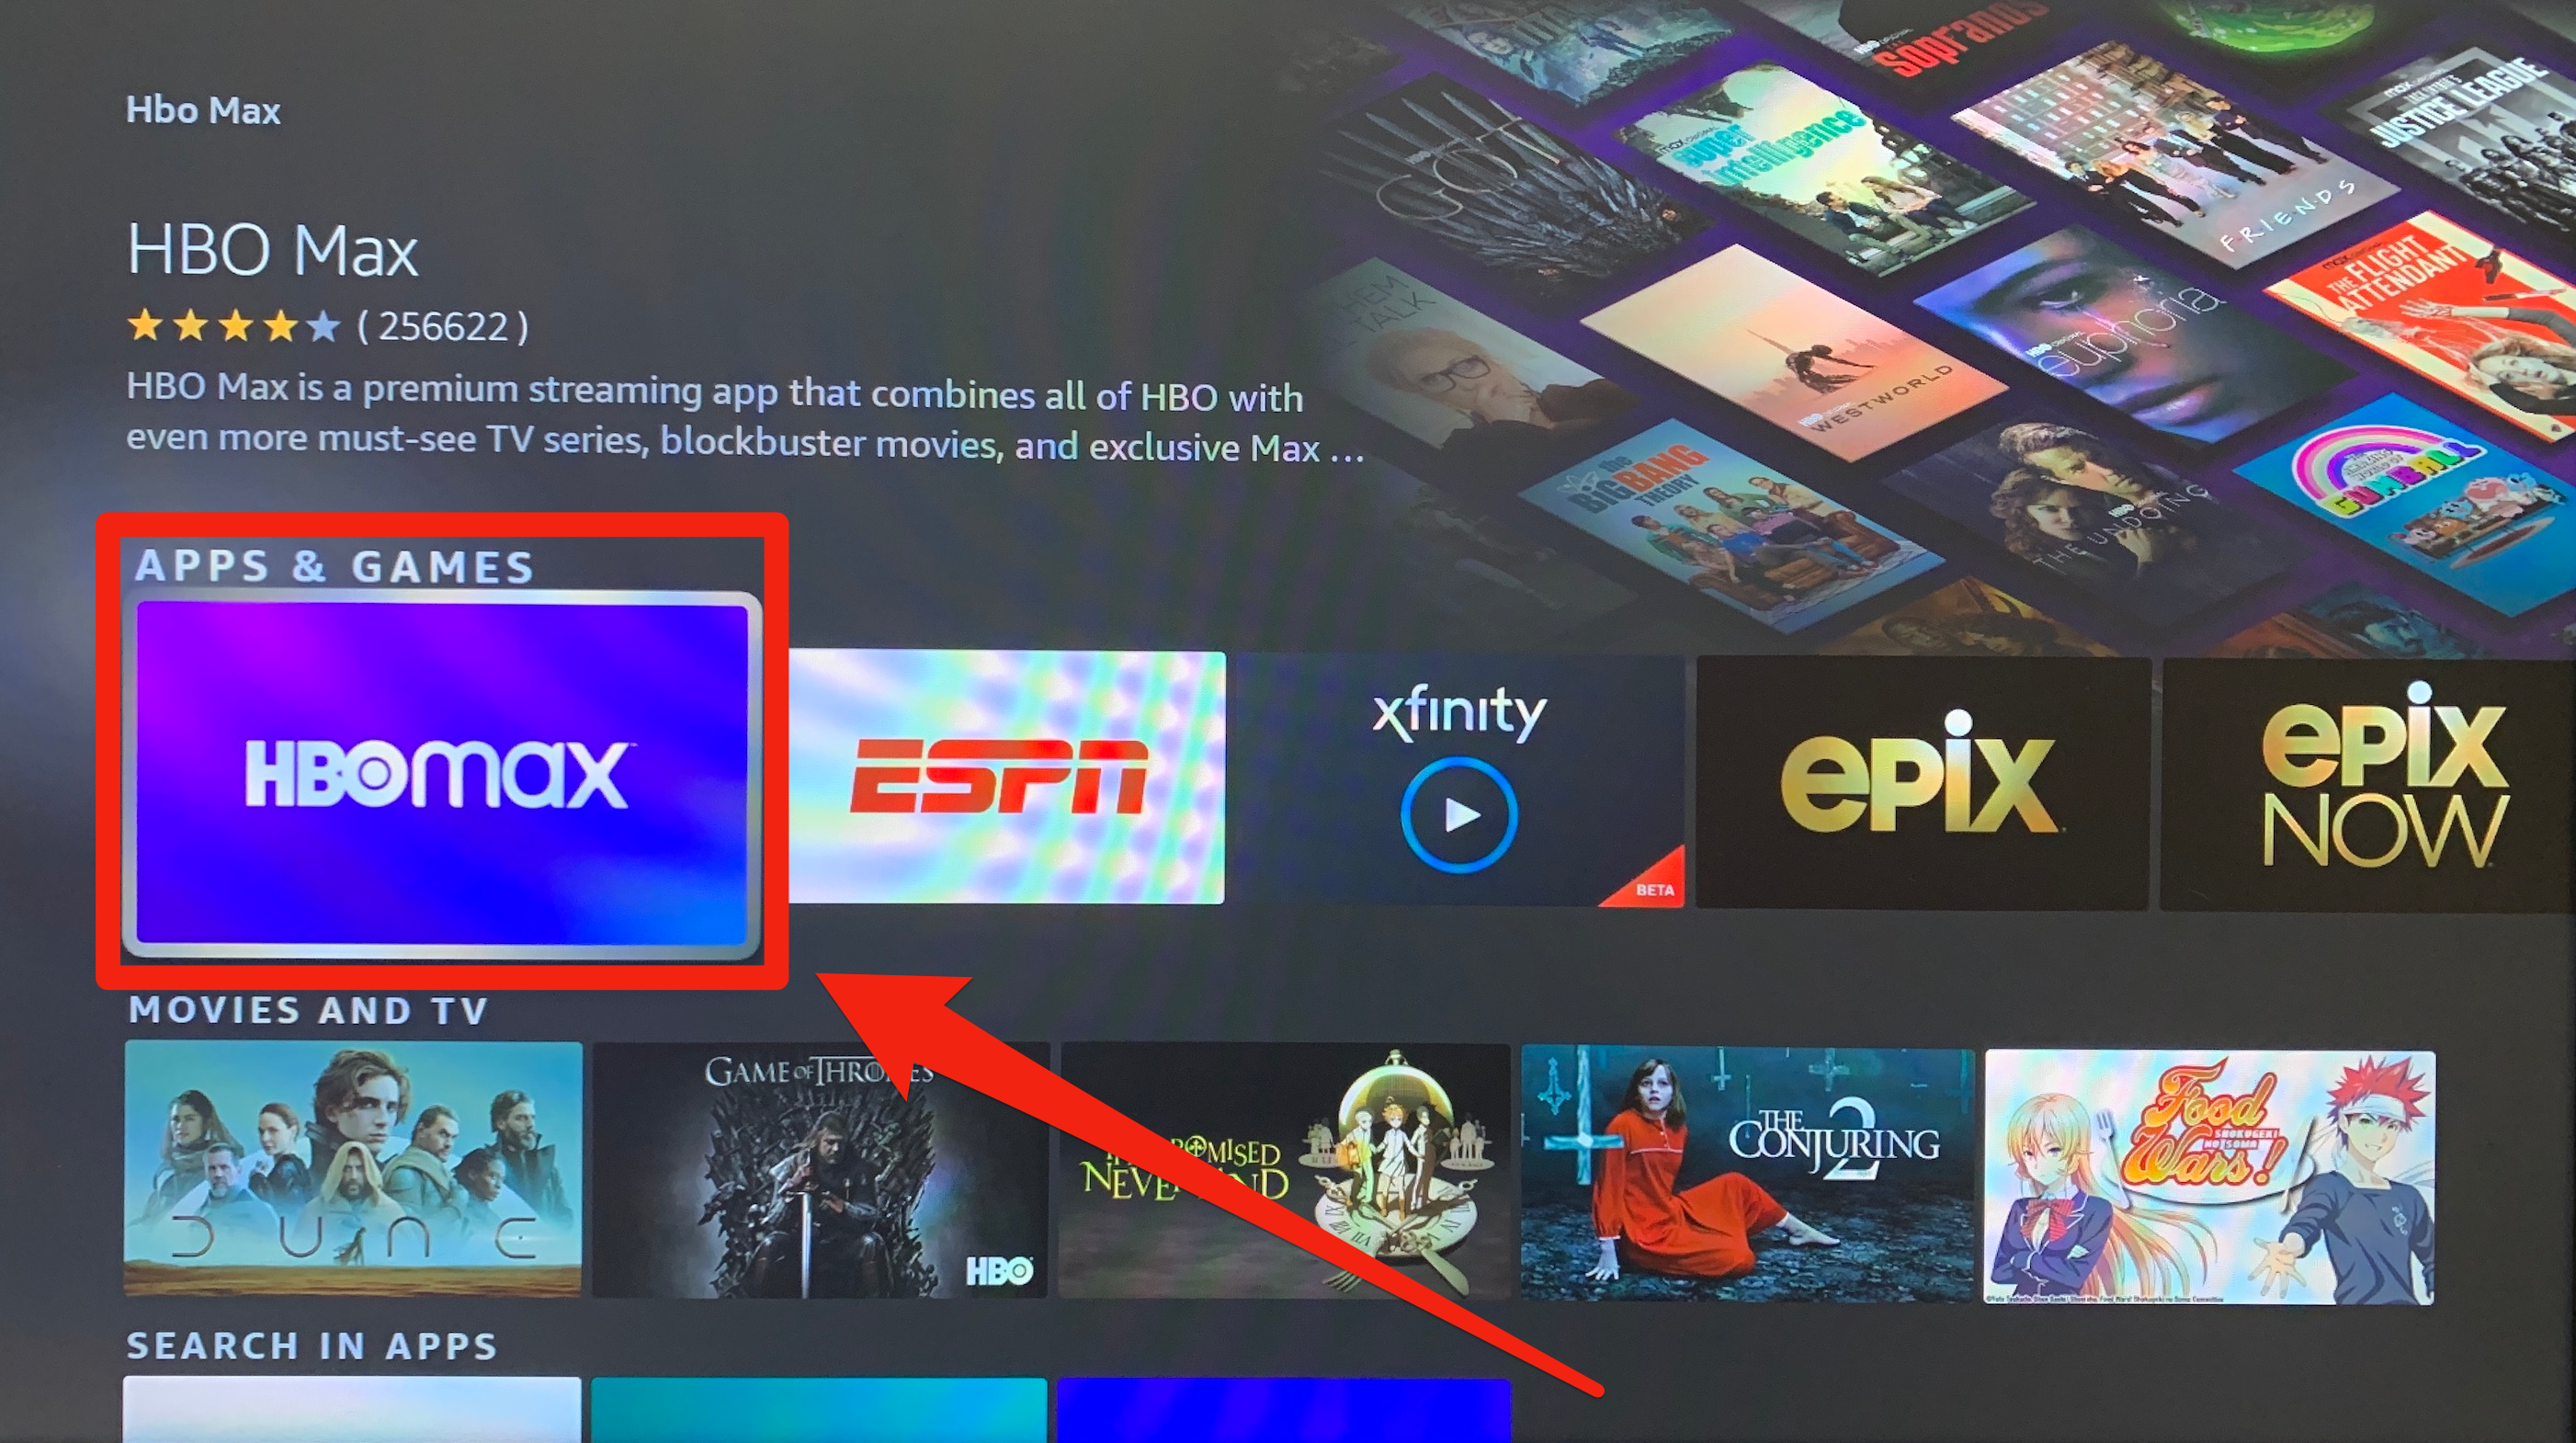 HBO Max appearing on a search results page on an Amazon Firestick.